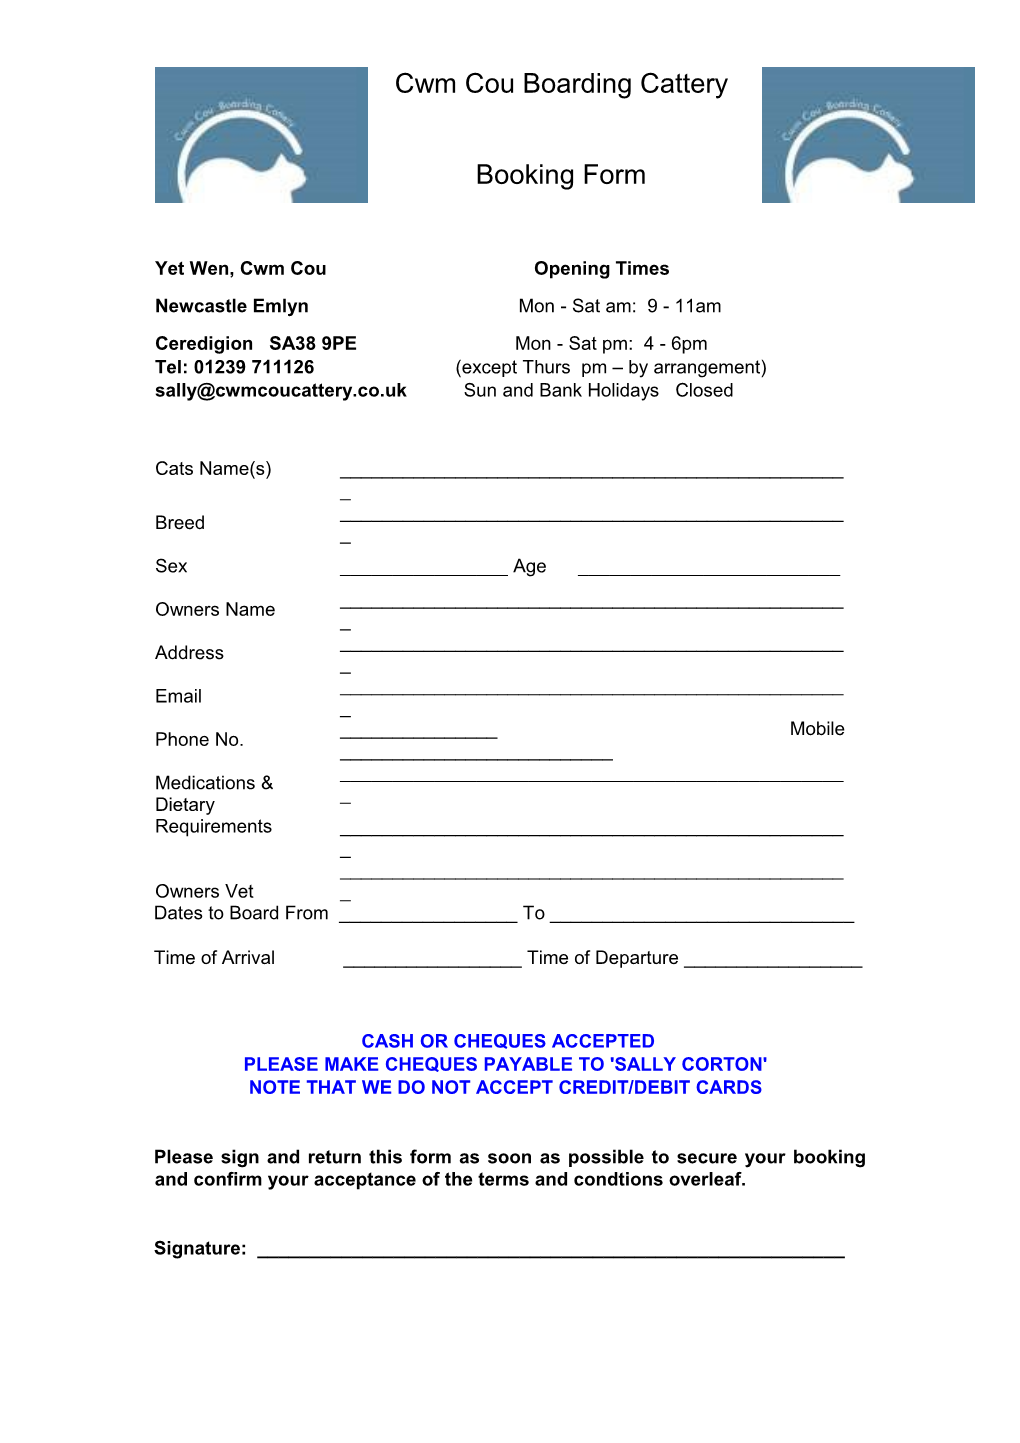 Booking Form Jan 2014 Revised